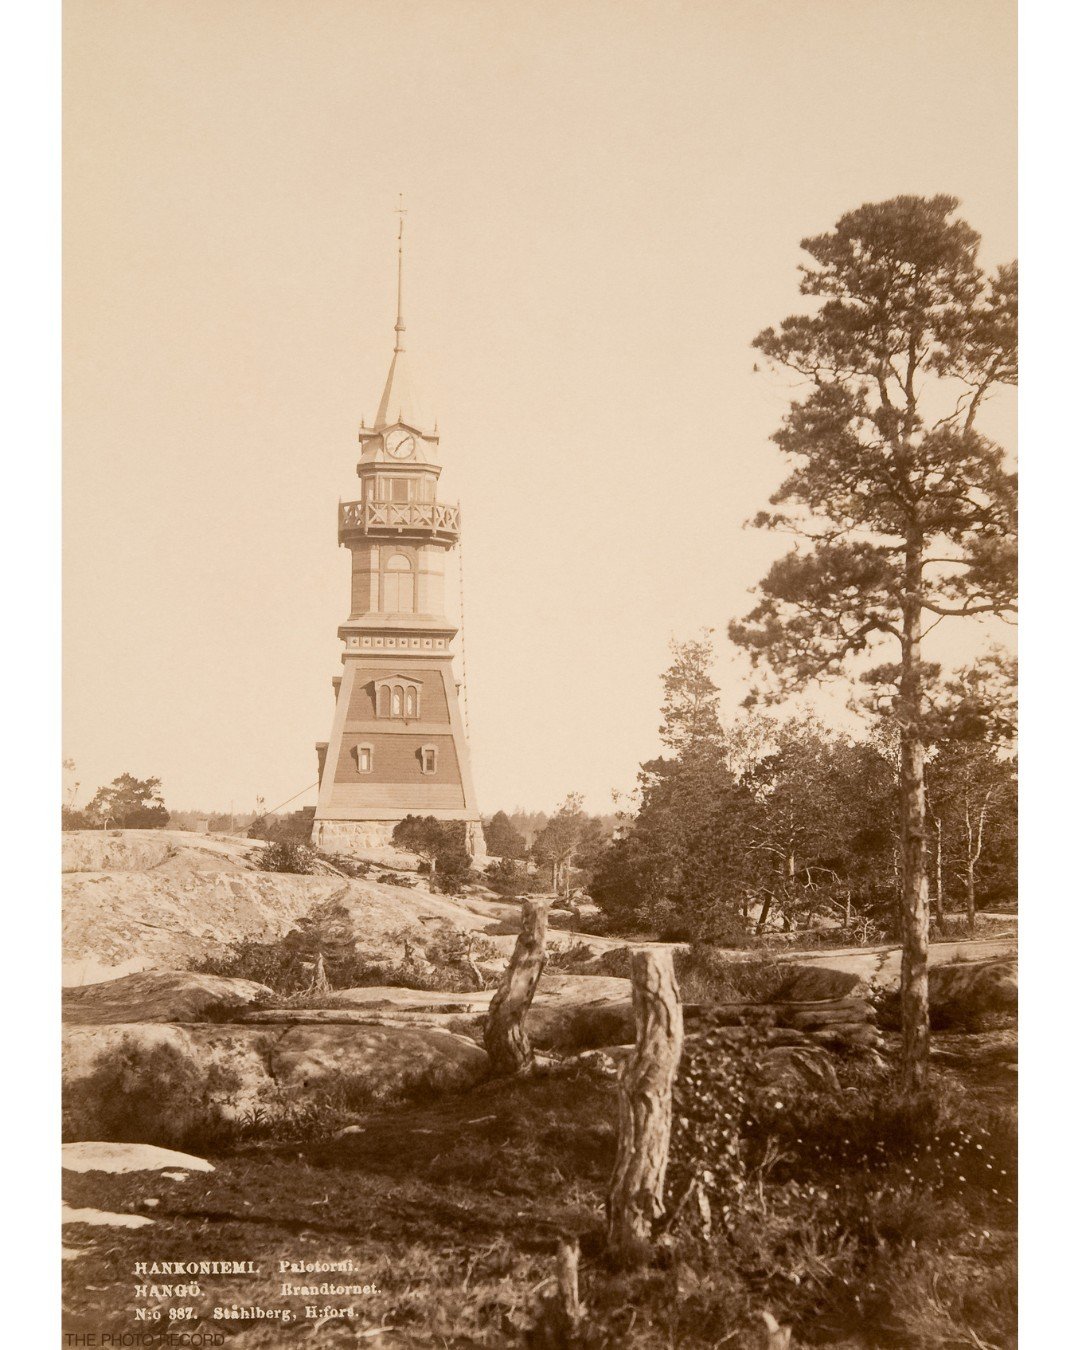 The Hanko Fire Tower, built in the late 19th century in 1886 and situated atop Vartiovuori Hill, served as a vital element in the town's fire prevention and safety infrastructure. Constructed mainly of wood, it stood as a tall structure, providing fi